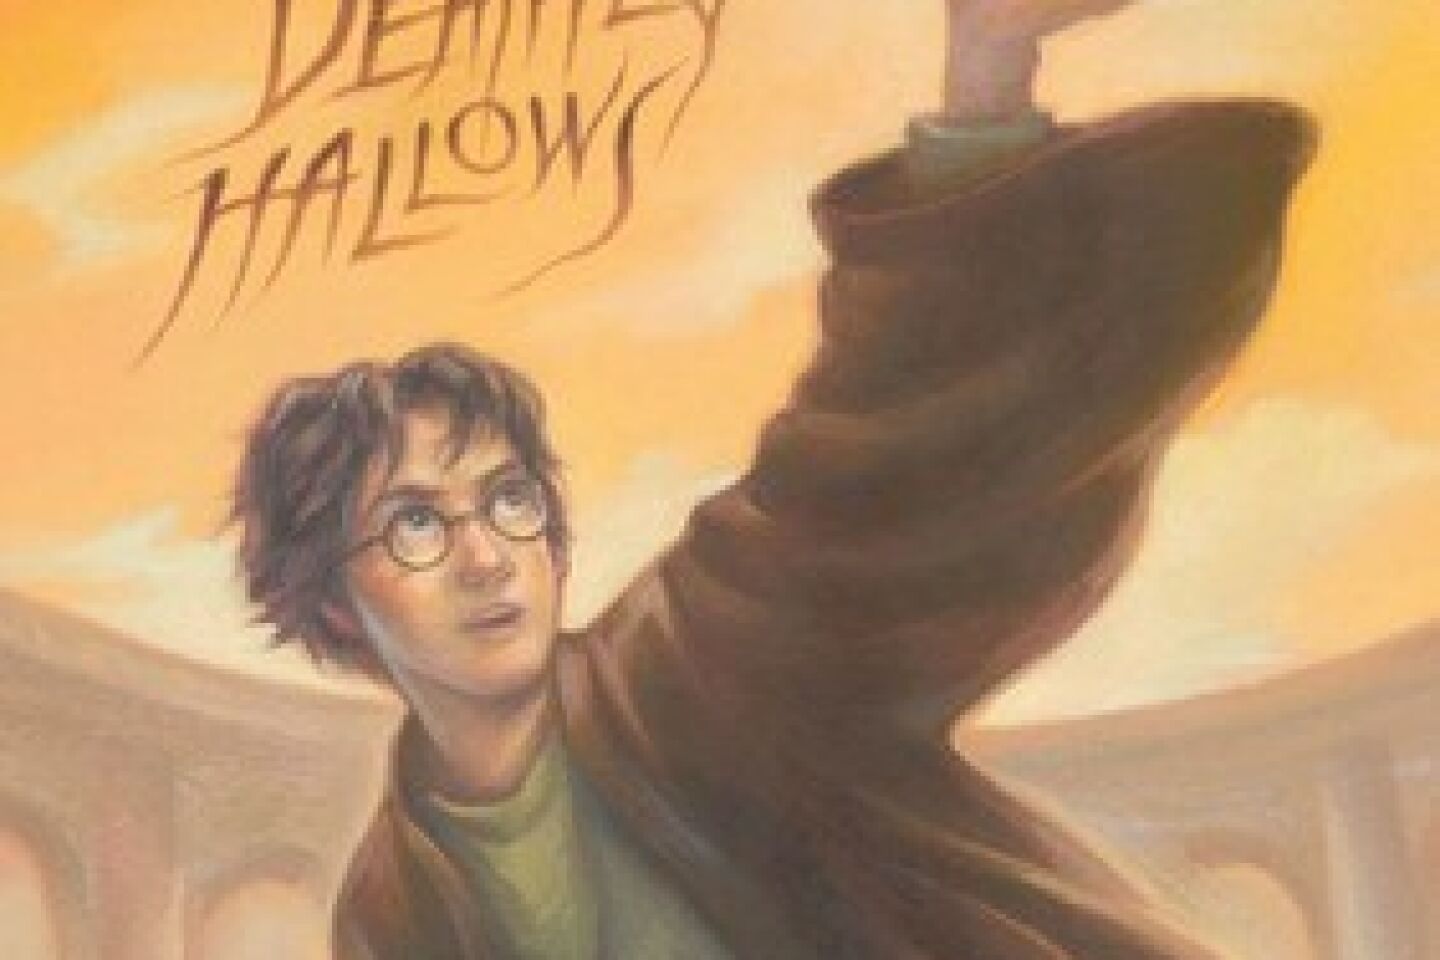 "Harry Potter and the Deathly Hallows"